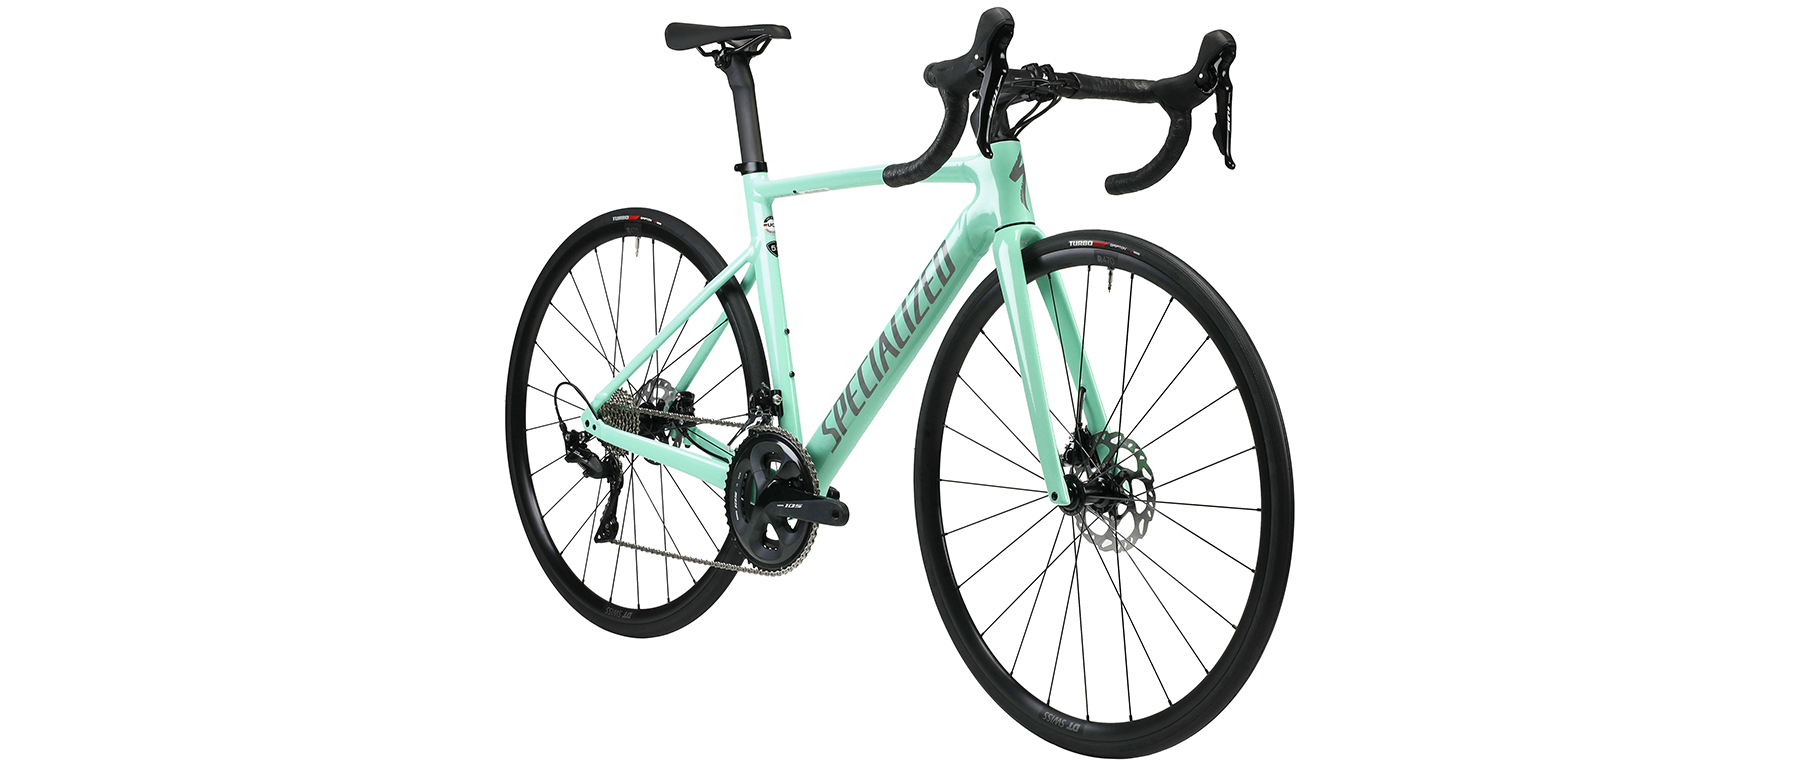 Specialized Allez Sprint 105 R7020 Disc Comp Bicycle 2022